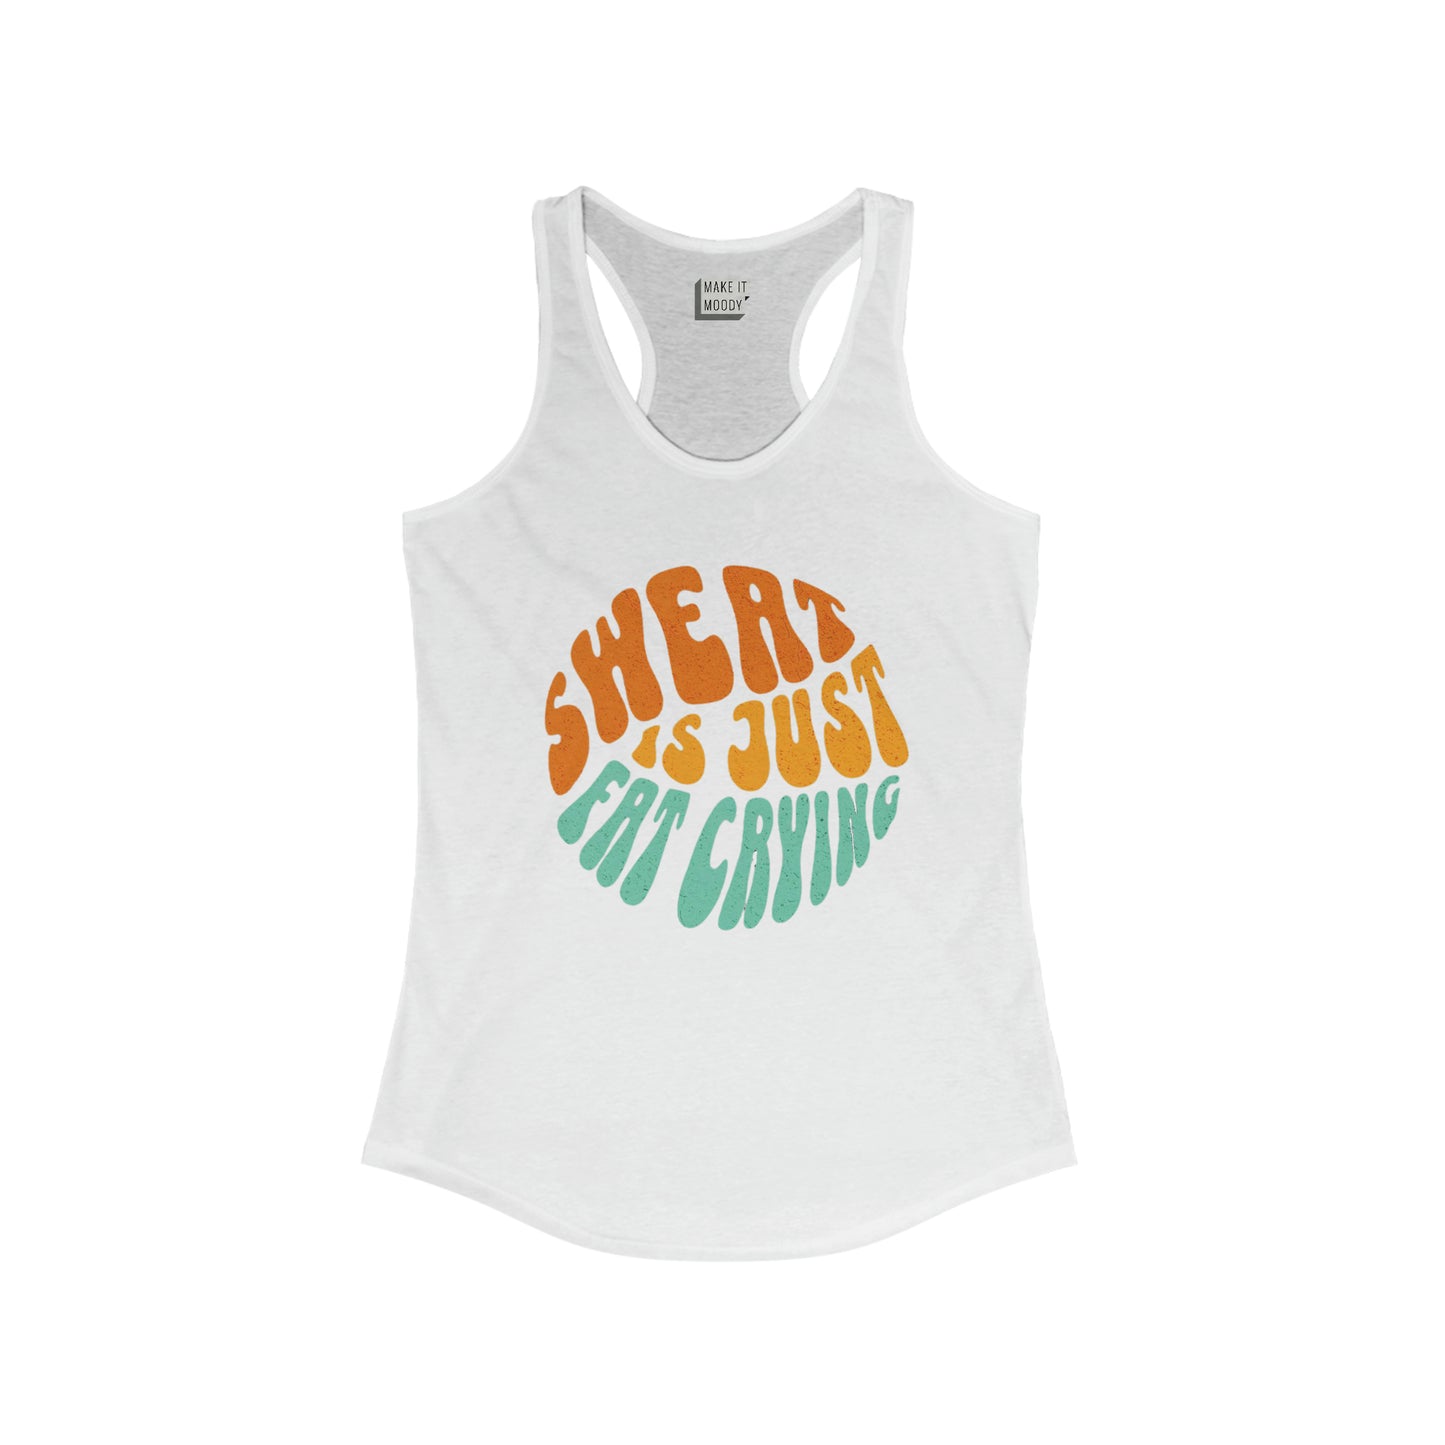 "Sweat Is Just Fat Crying" Gym Tank